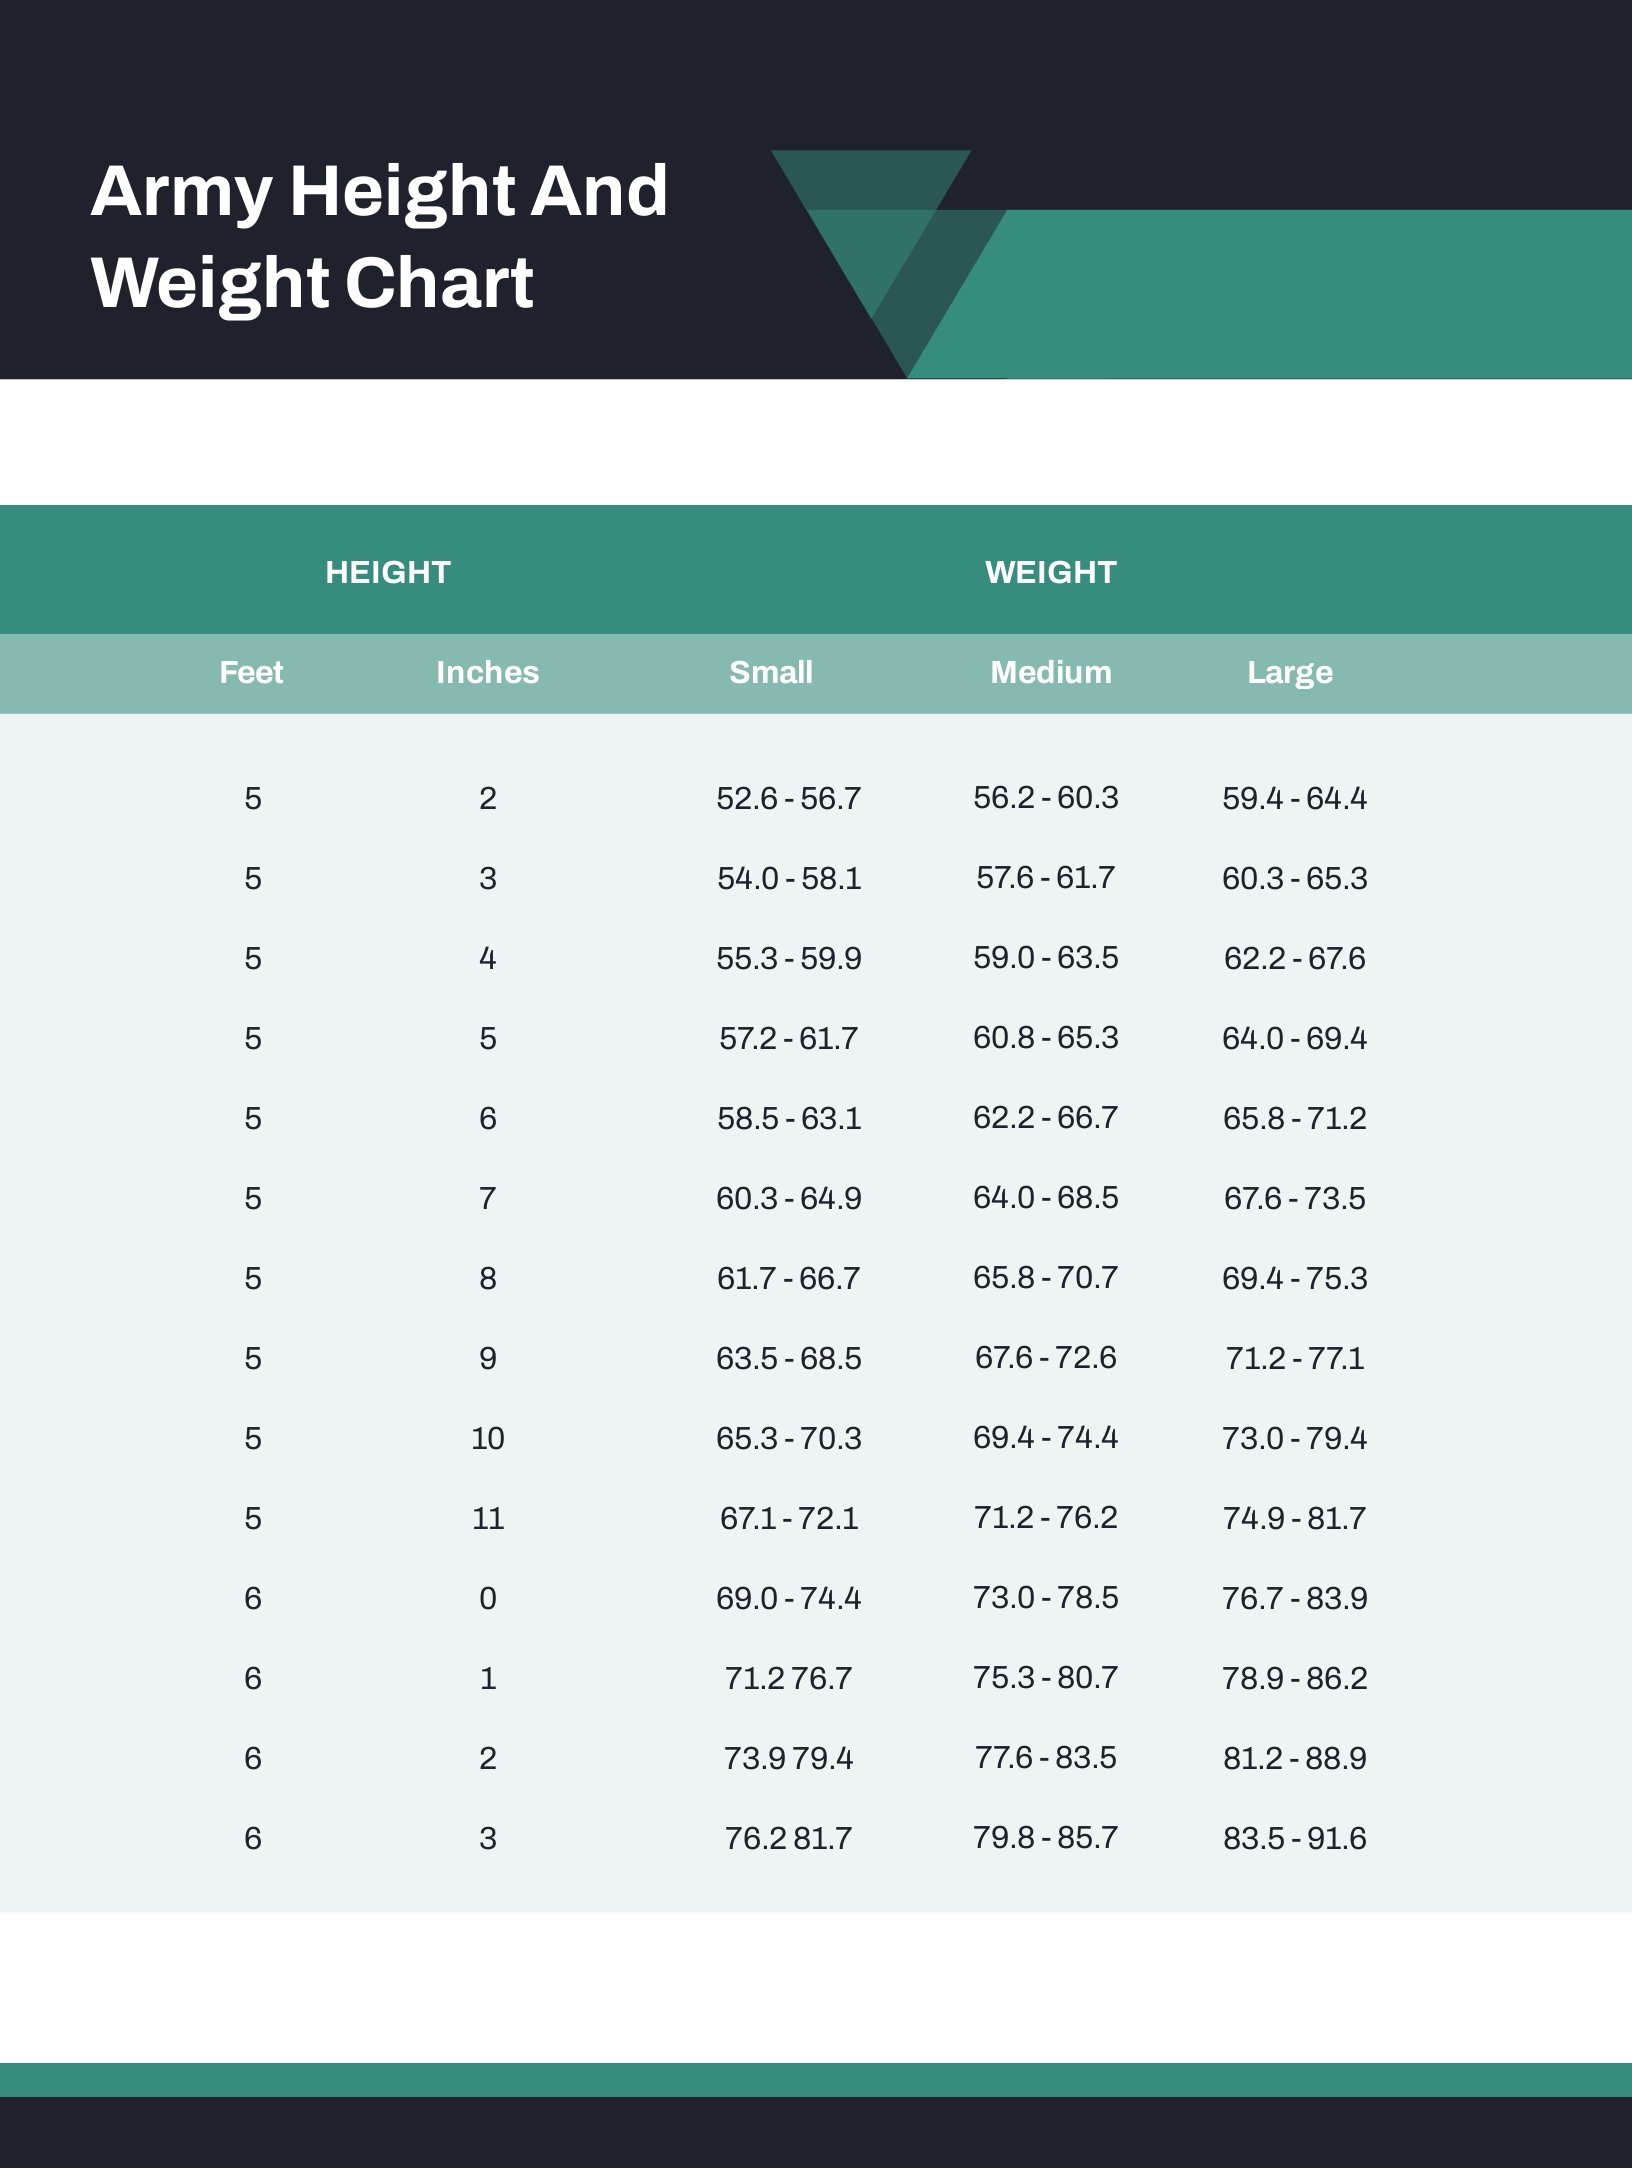 Army Height and Weight Chart